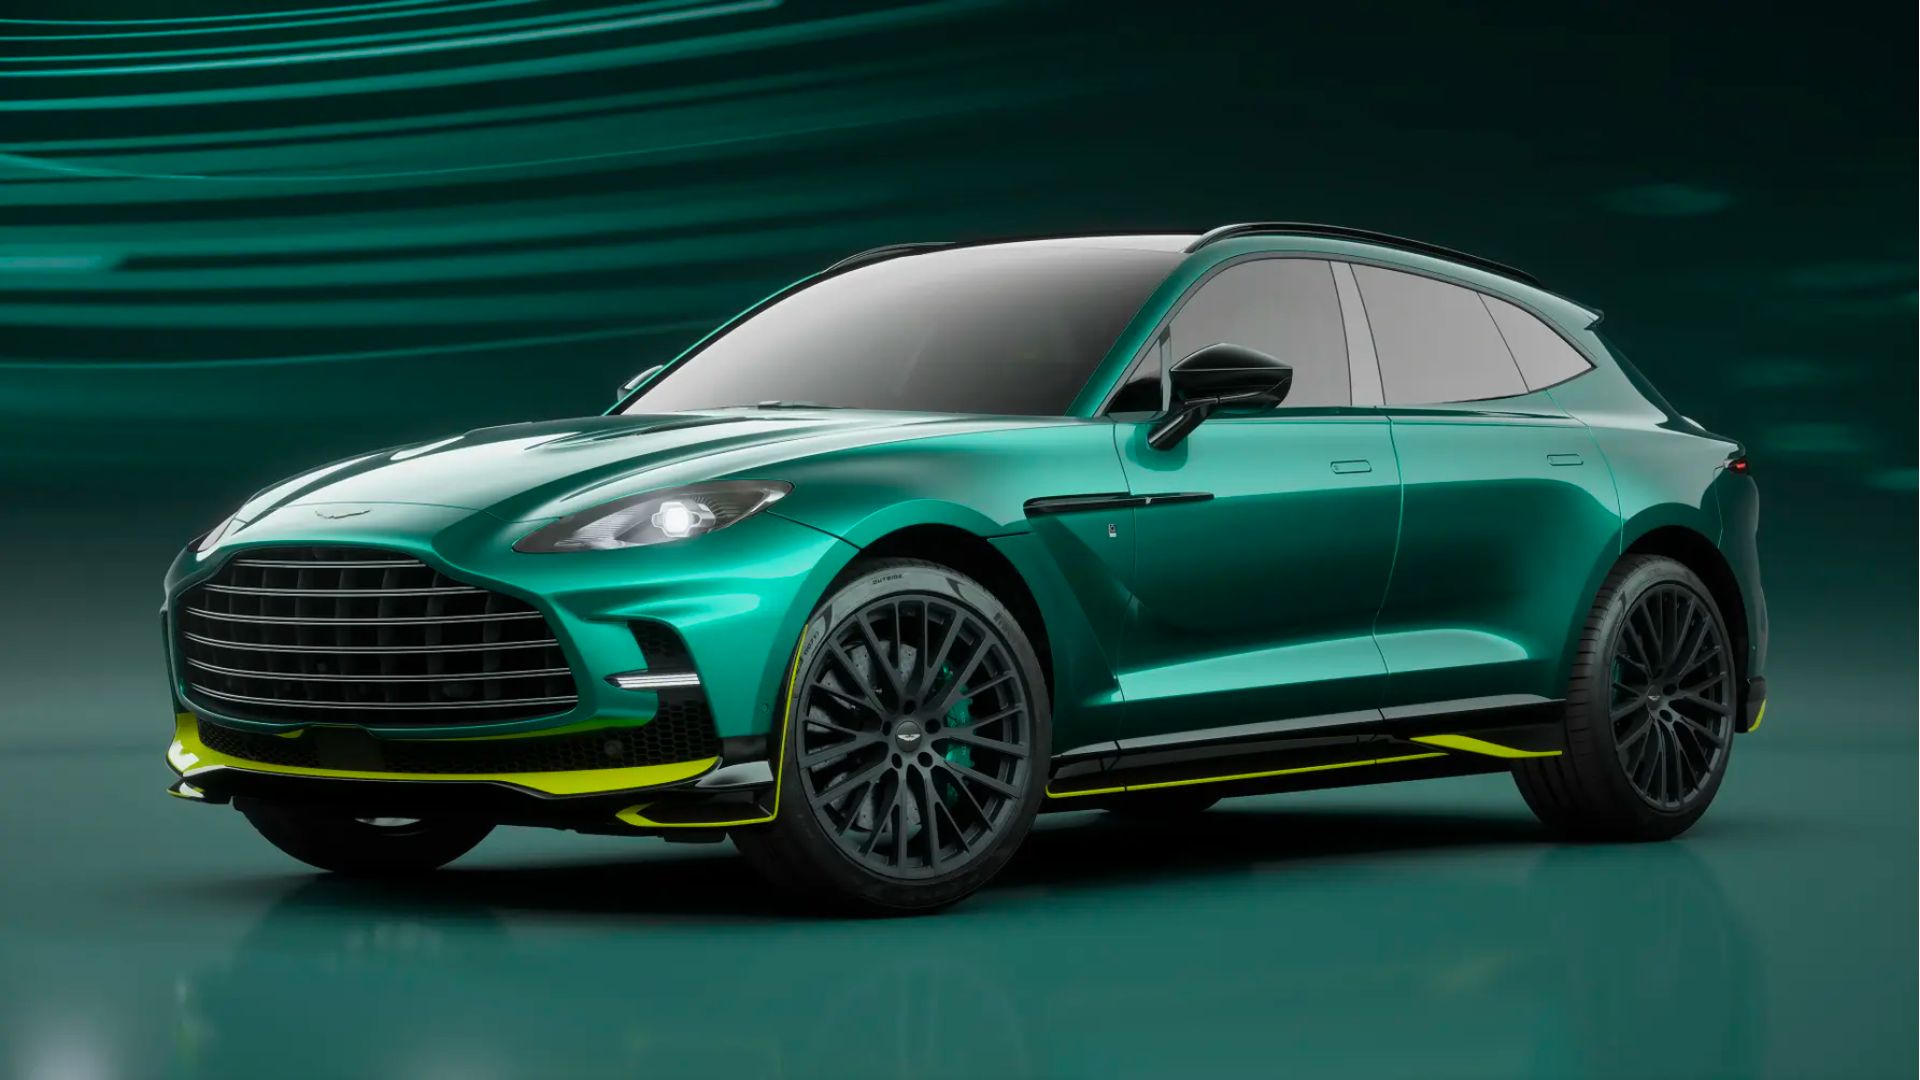 Aston Martin gives the DBX707 more F1-inspired looks